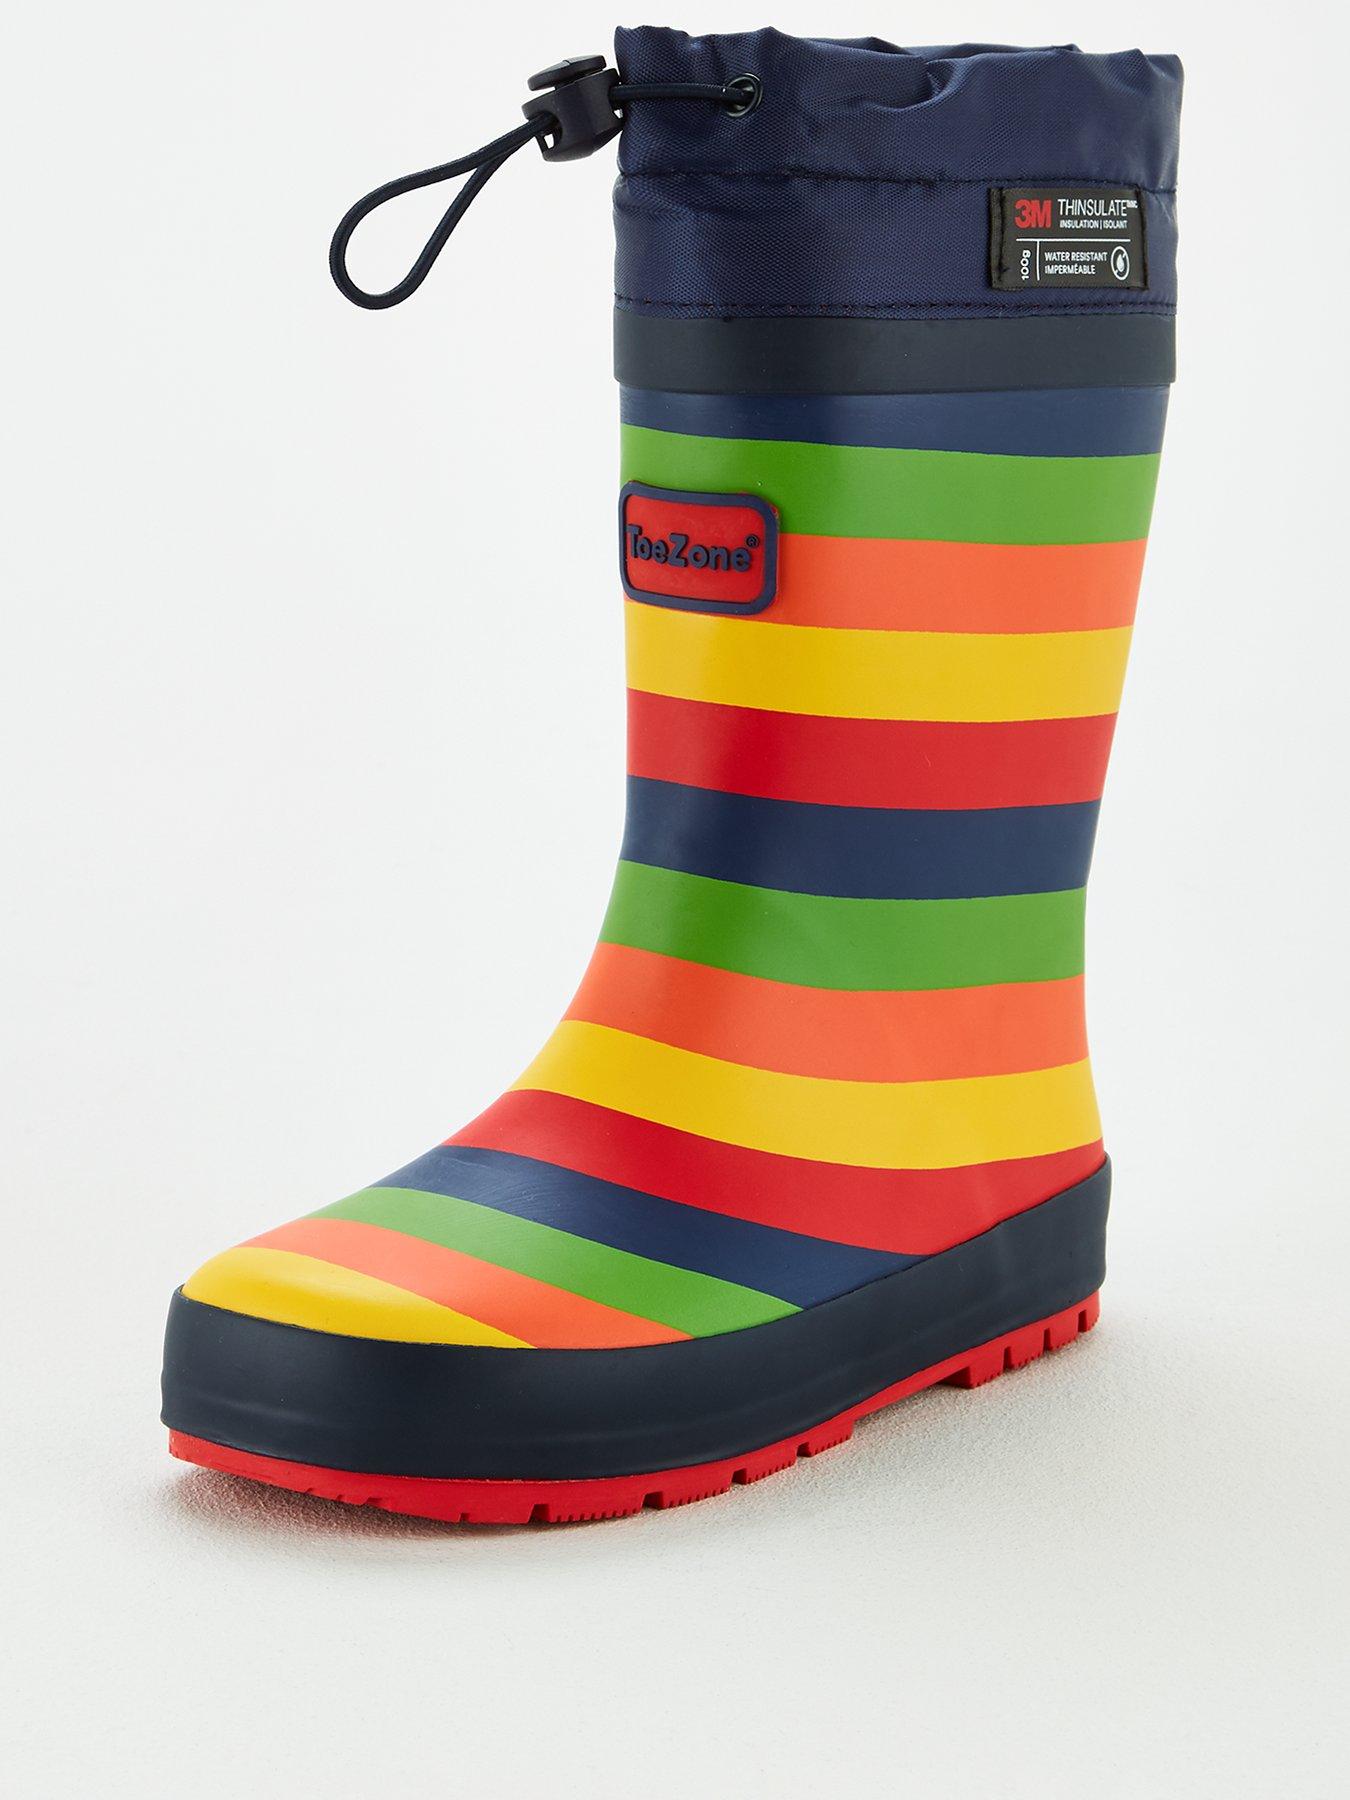 welly boots for toddlers